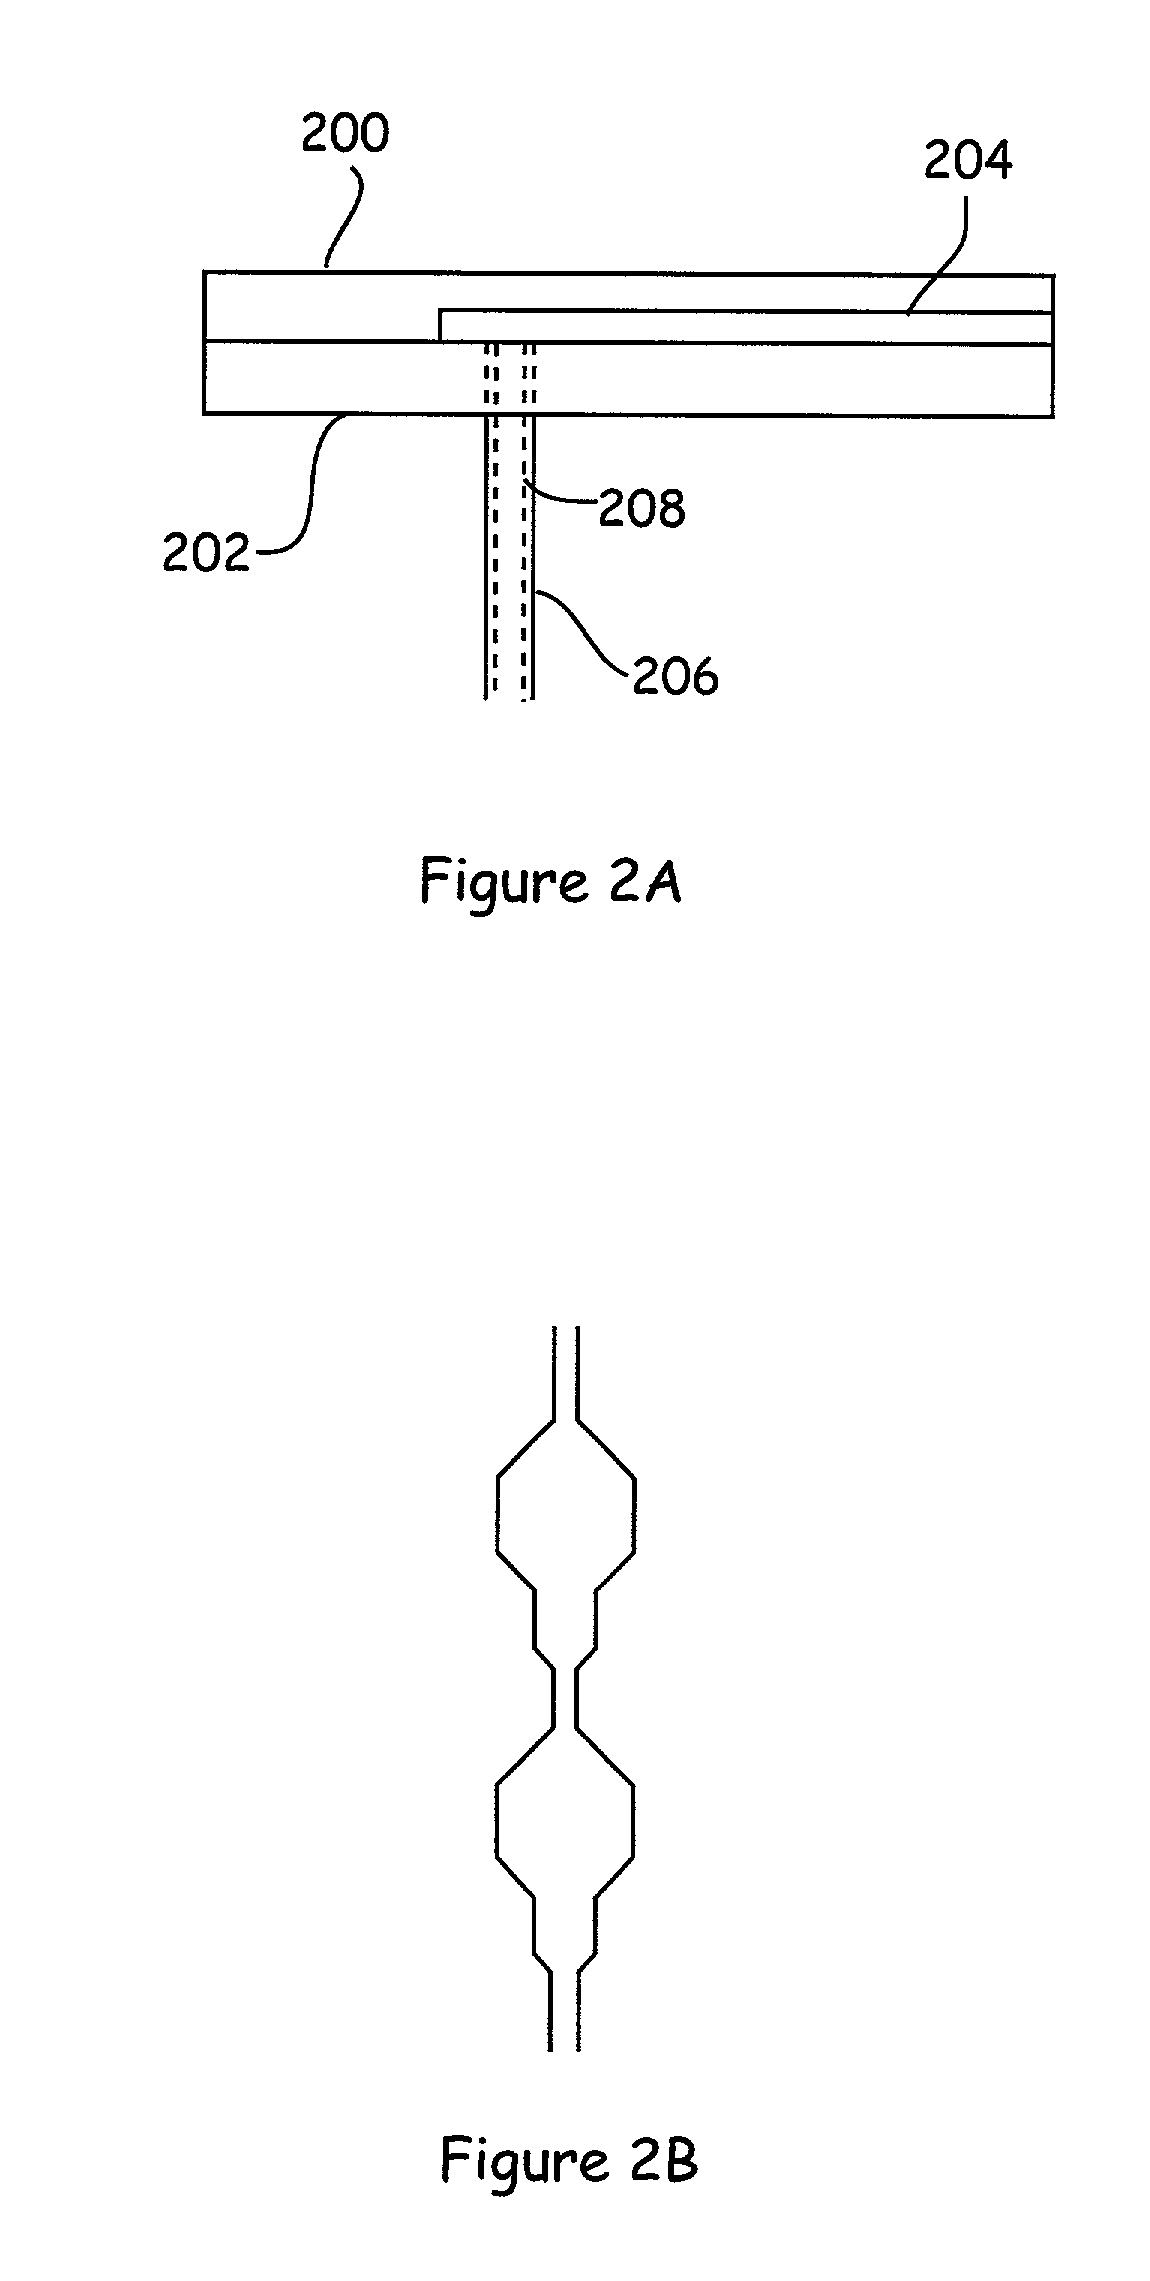 Process for filling microfluidic channels